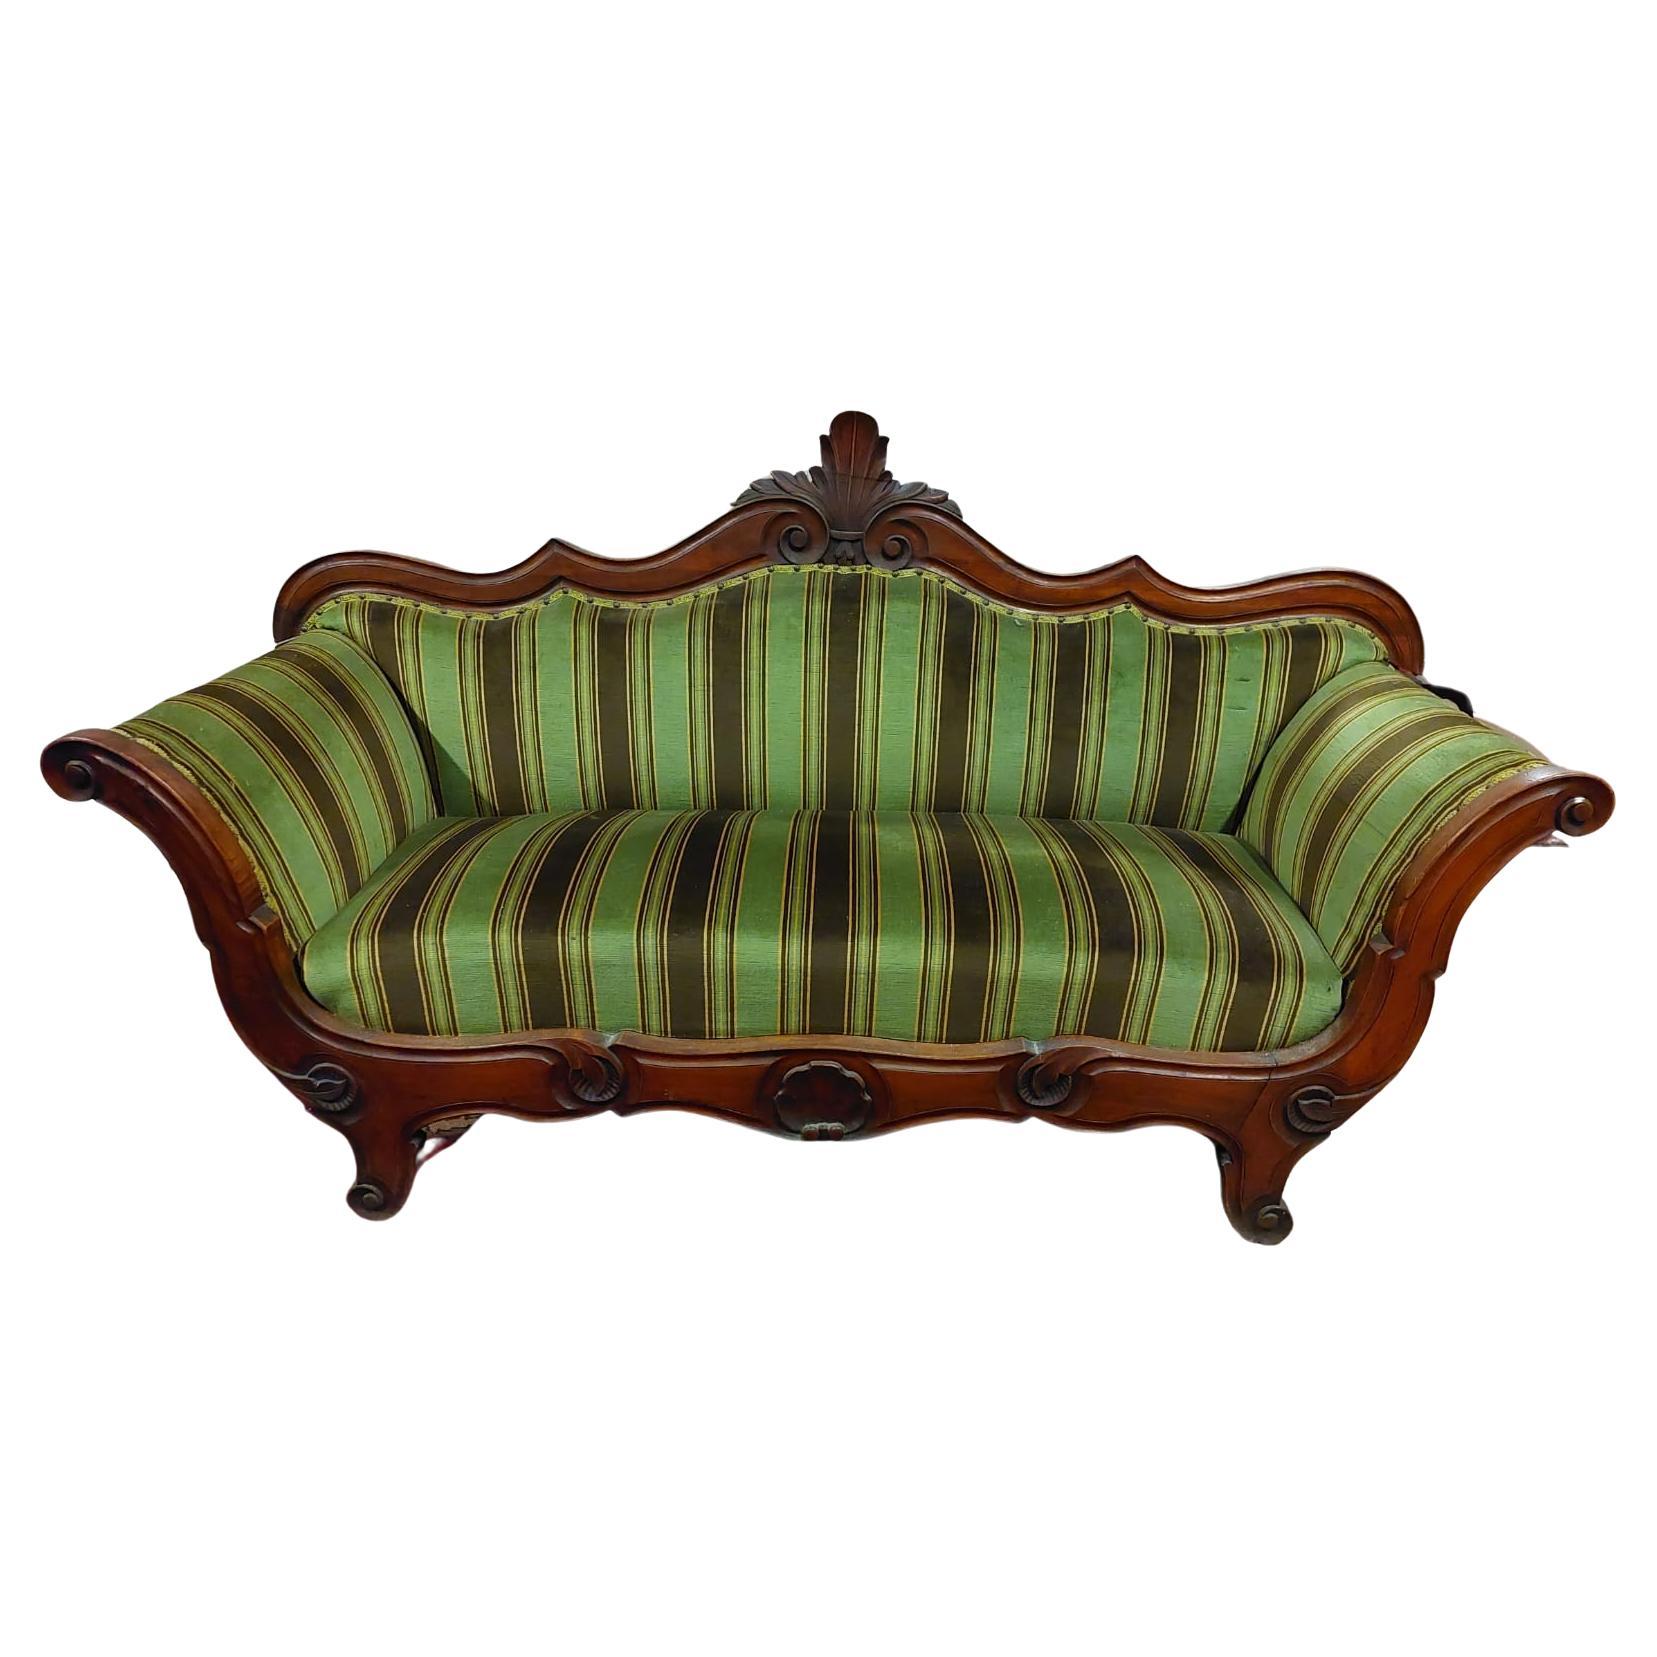 Antique Louis Philippe Sofa in Inlay Walnut and Green Fabric, 19th Century Italy